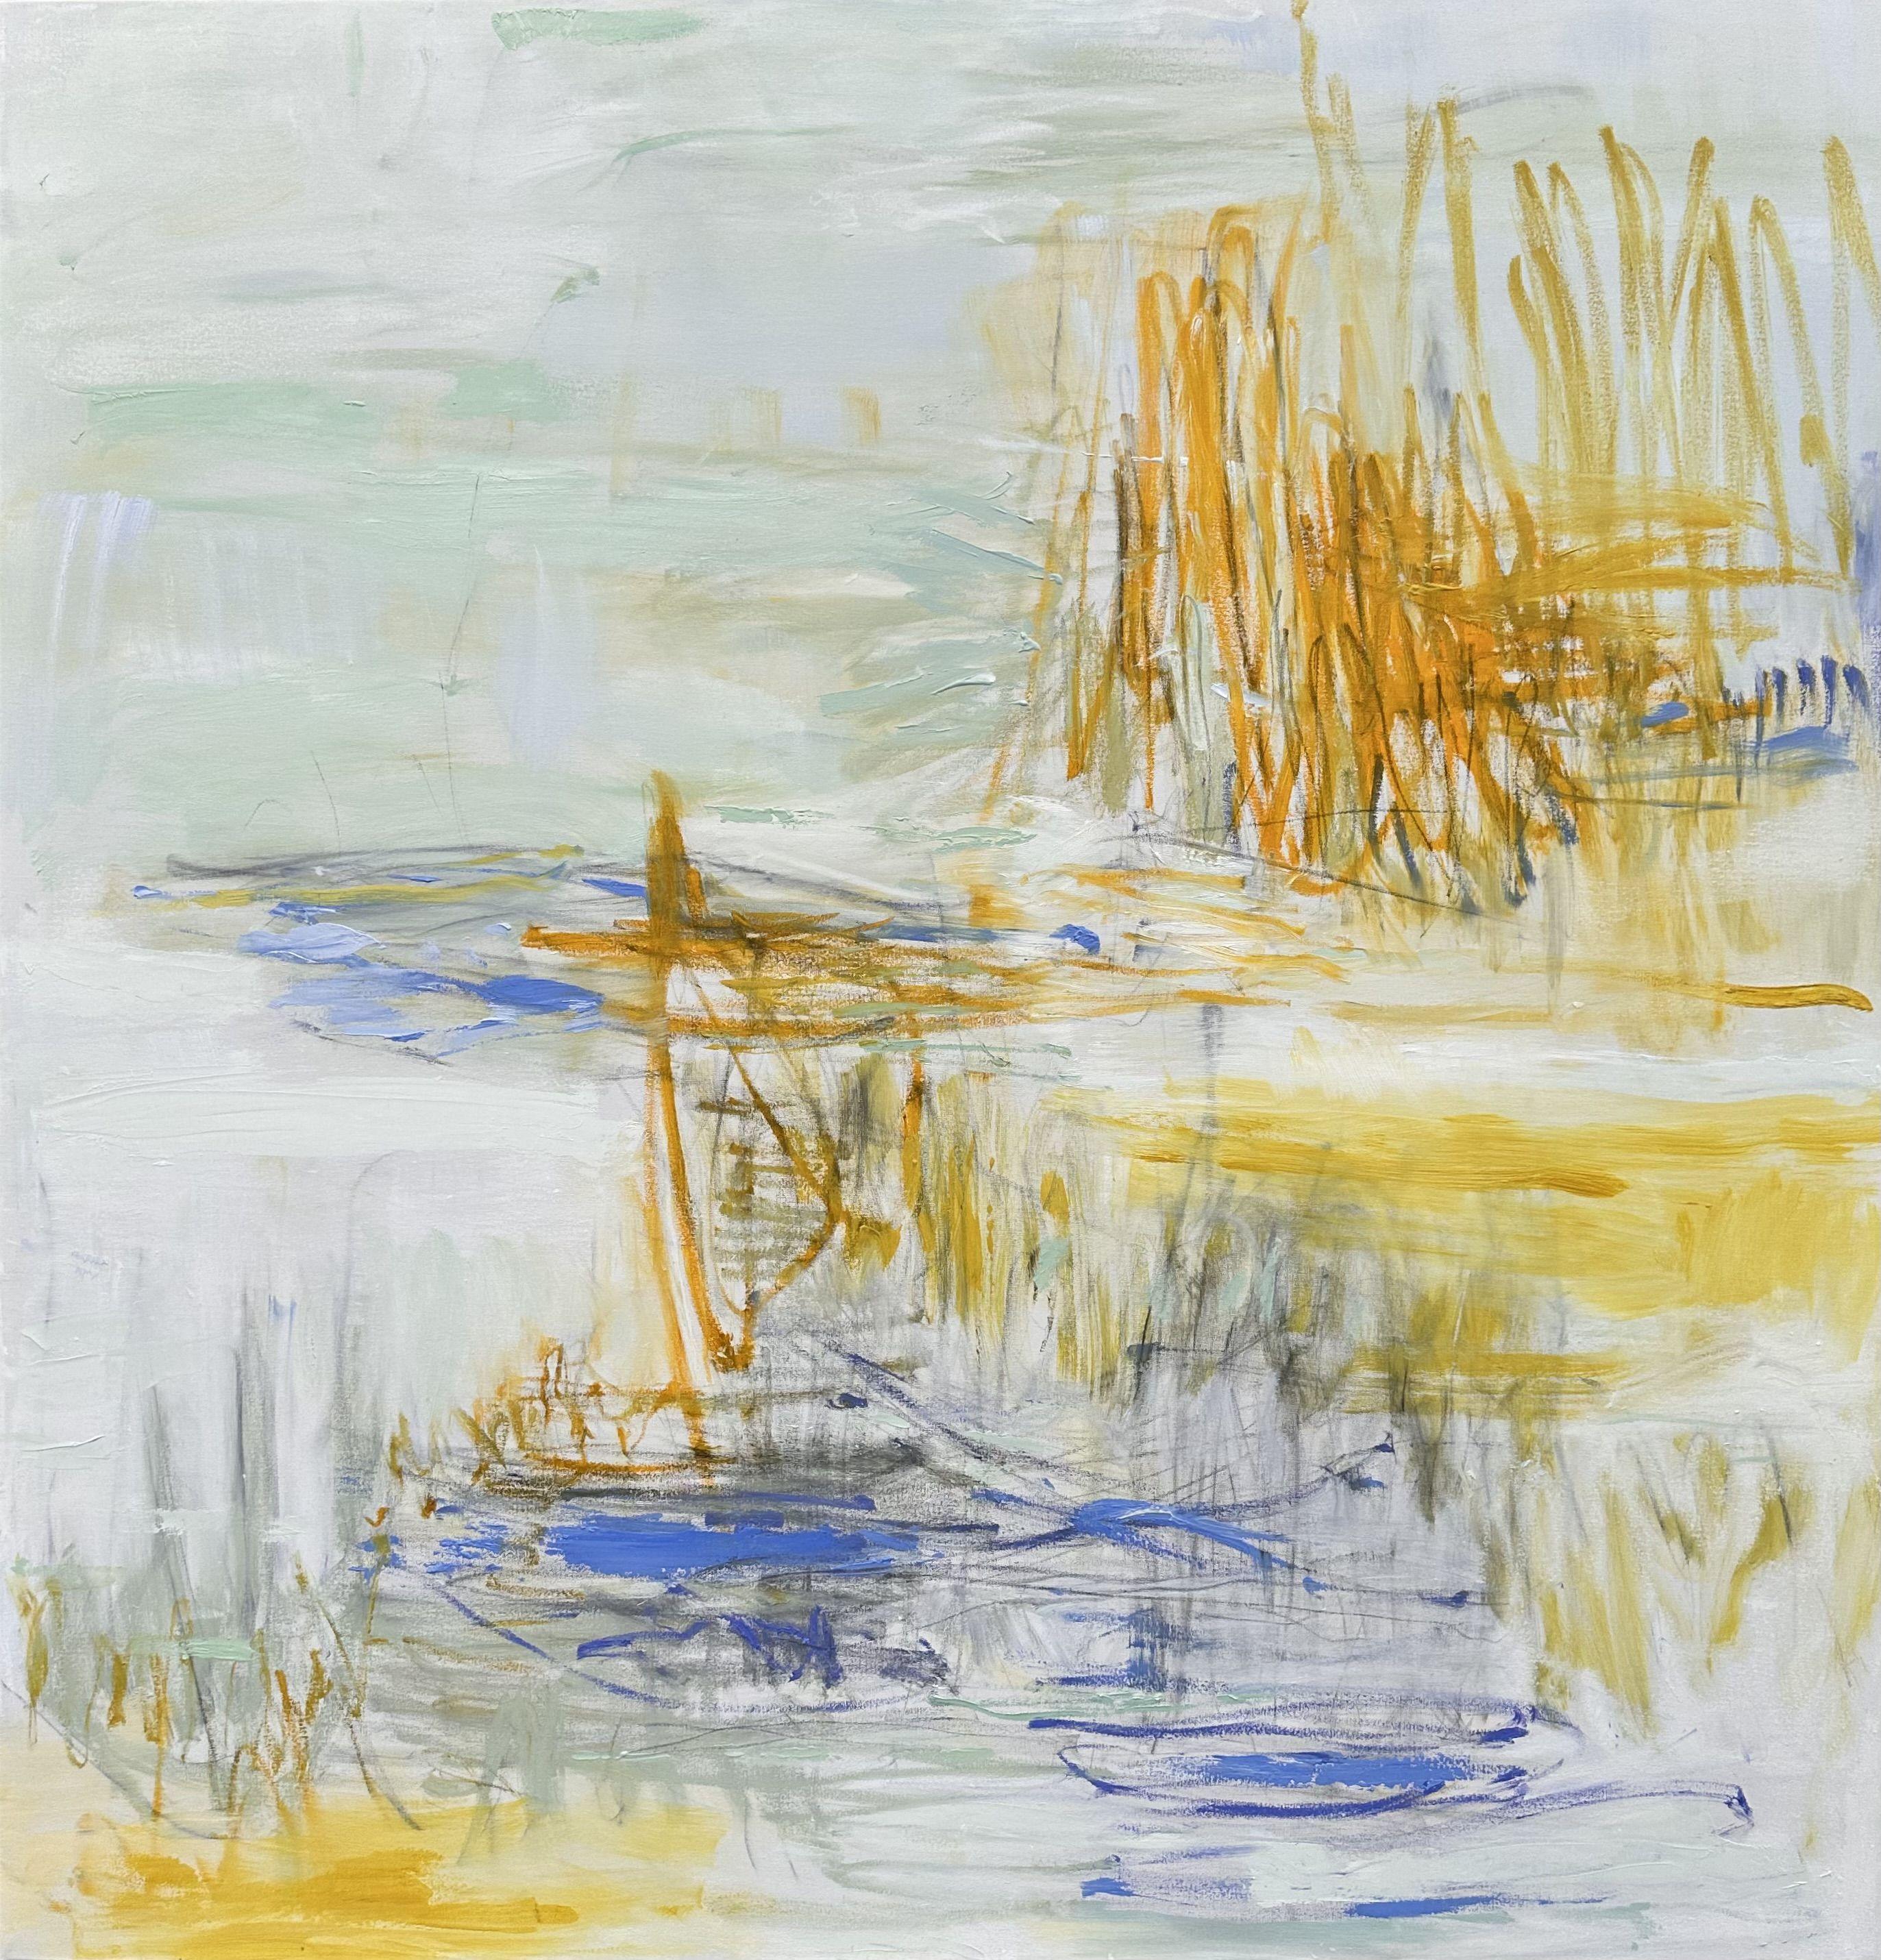 "Sea Island" is a large dynamic abstract expressionist landscape oil painting on canvas by Trixie Pitts, a trusted artist seller. The bright and refreshing components of the palette are beautifully contrasted with soft, muted pale tones. The palette